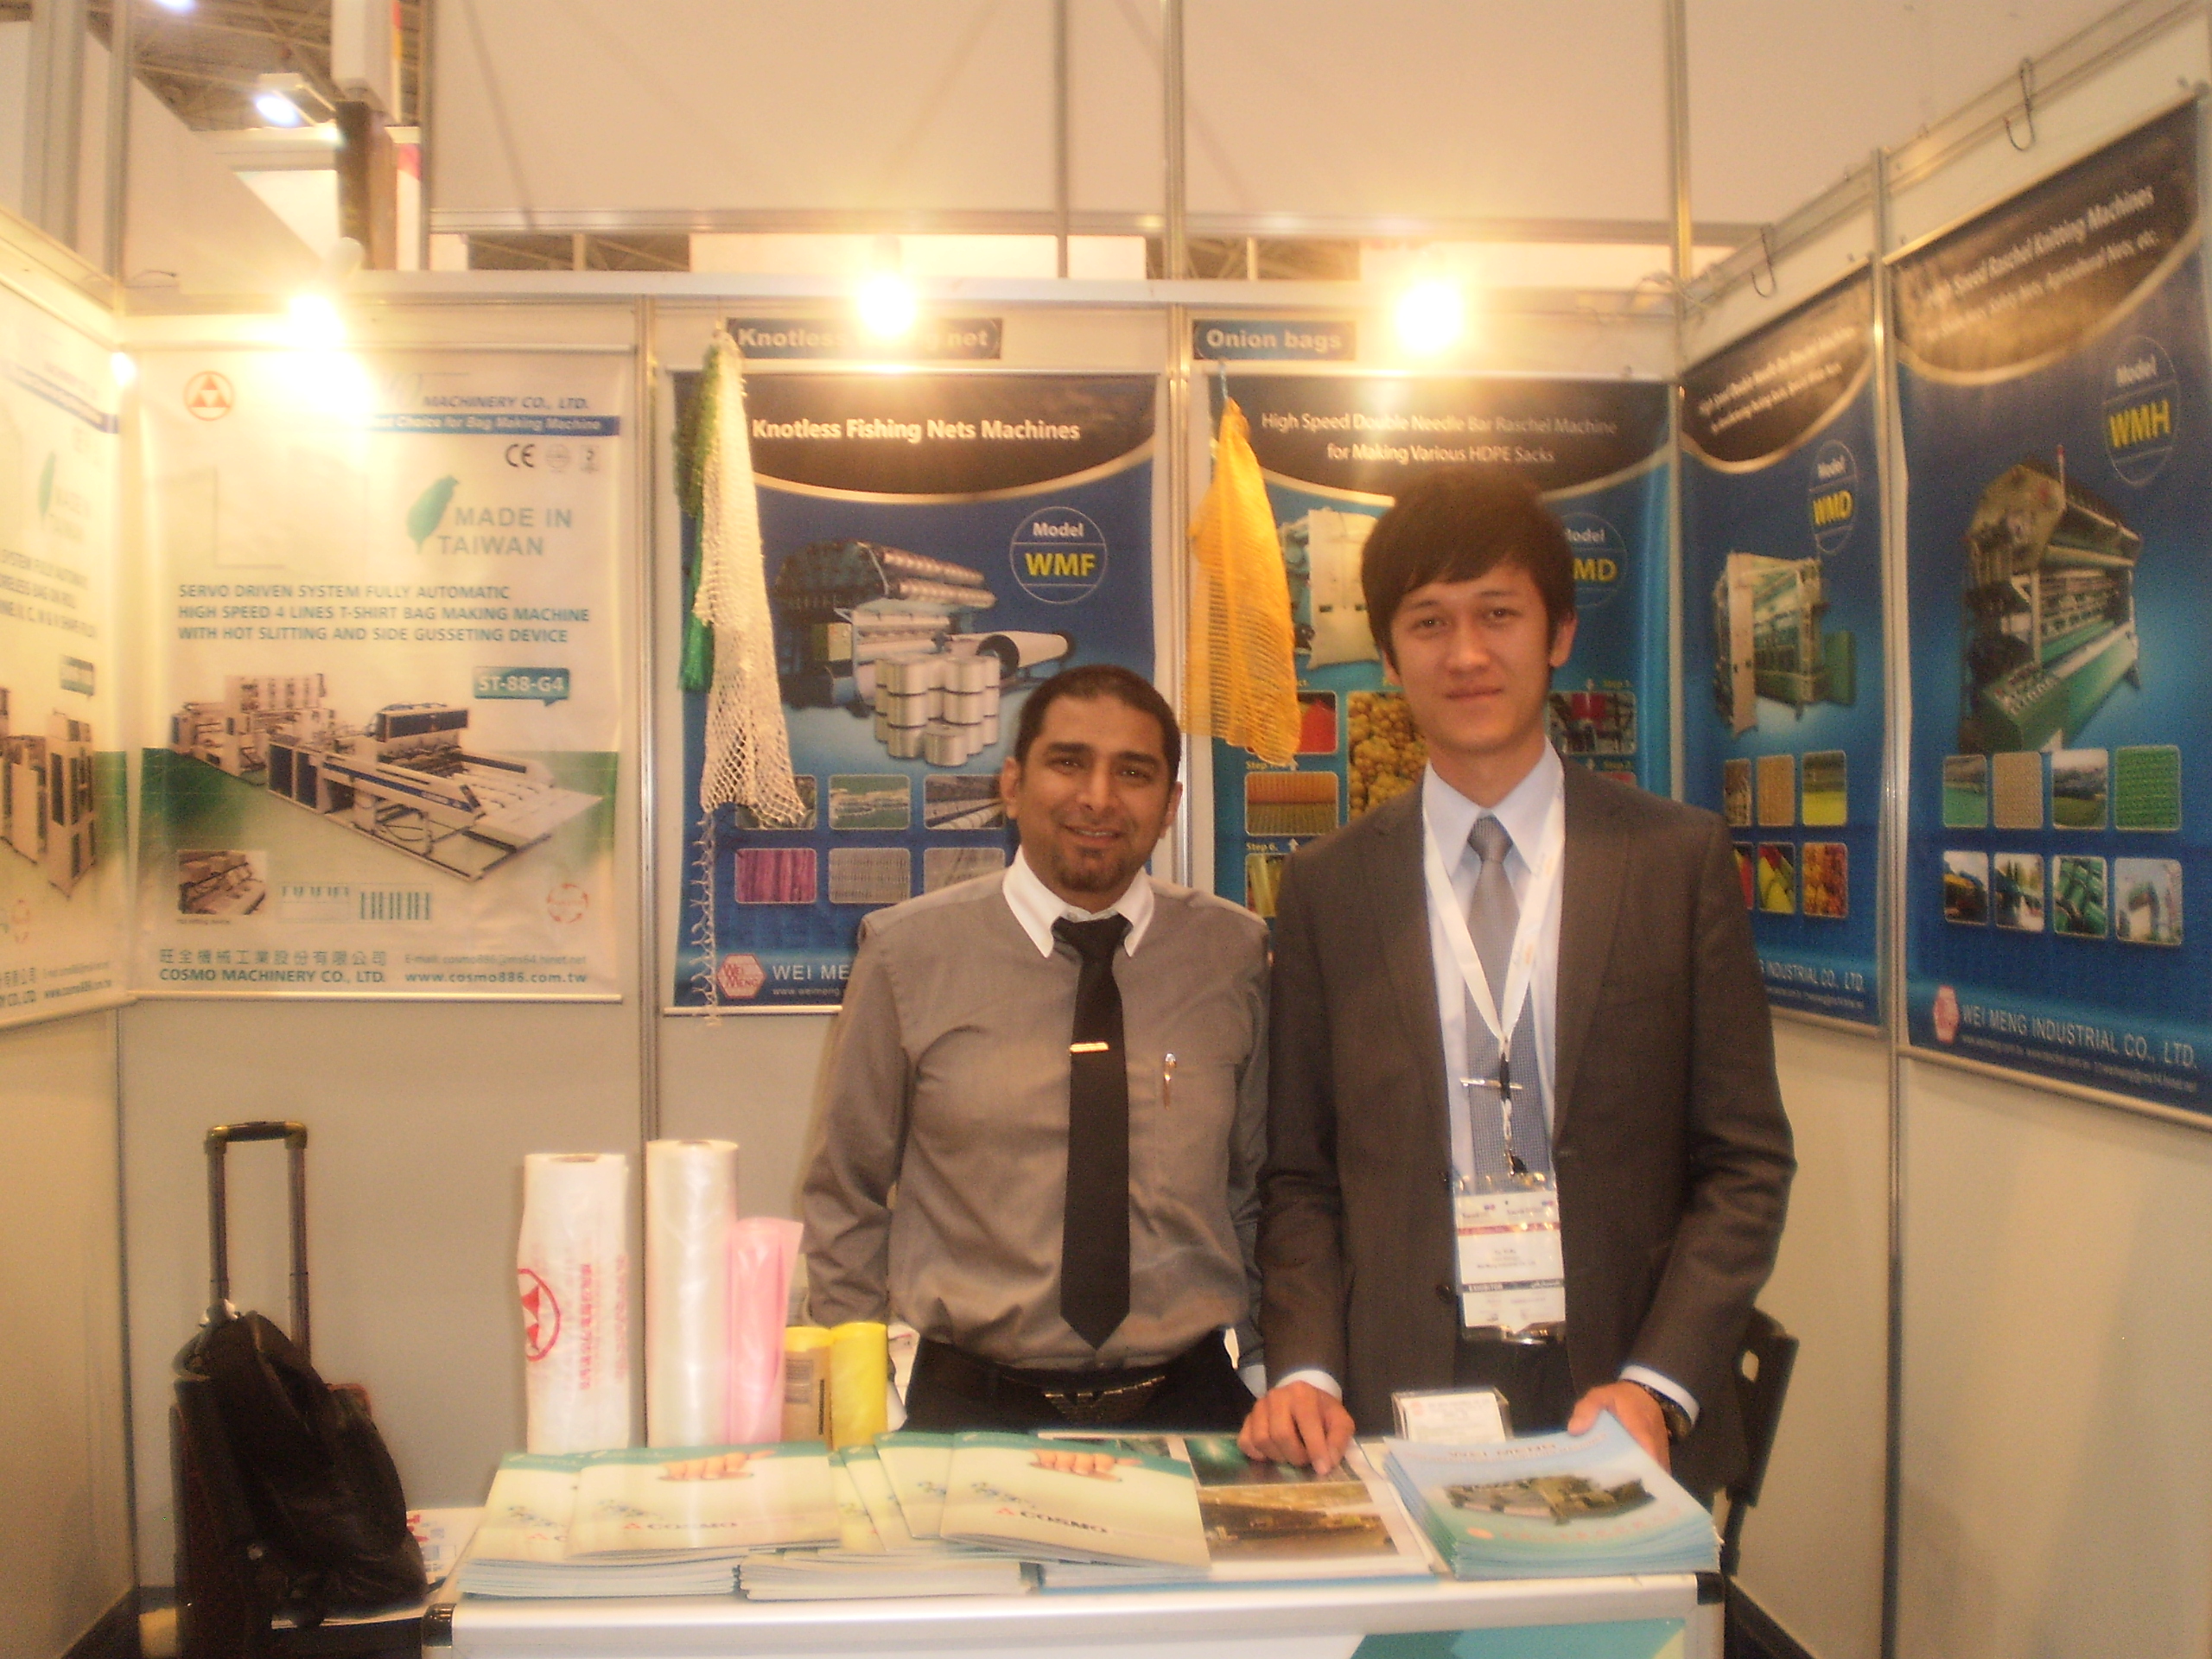 Yazar Khan, Cosmo's sales and marketing manager (left), and Sam Yu, mechanical engineer at Wei Meng, pose at the booth shared by the two companies.